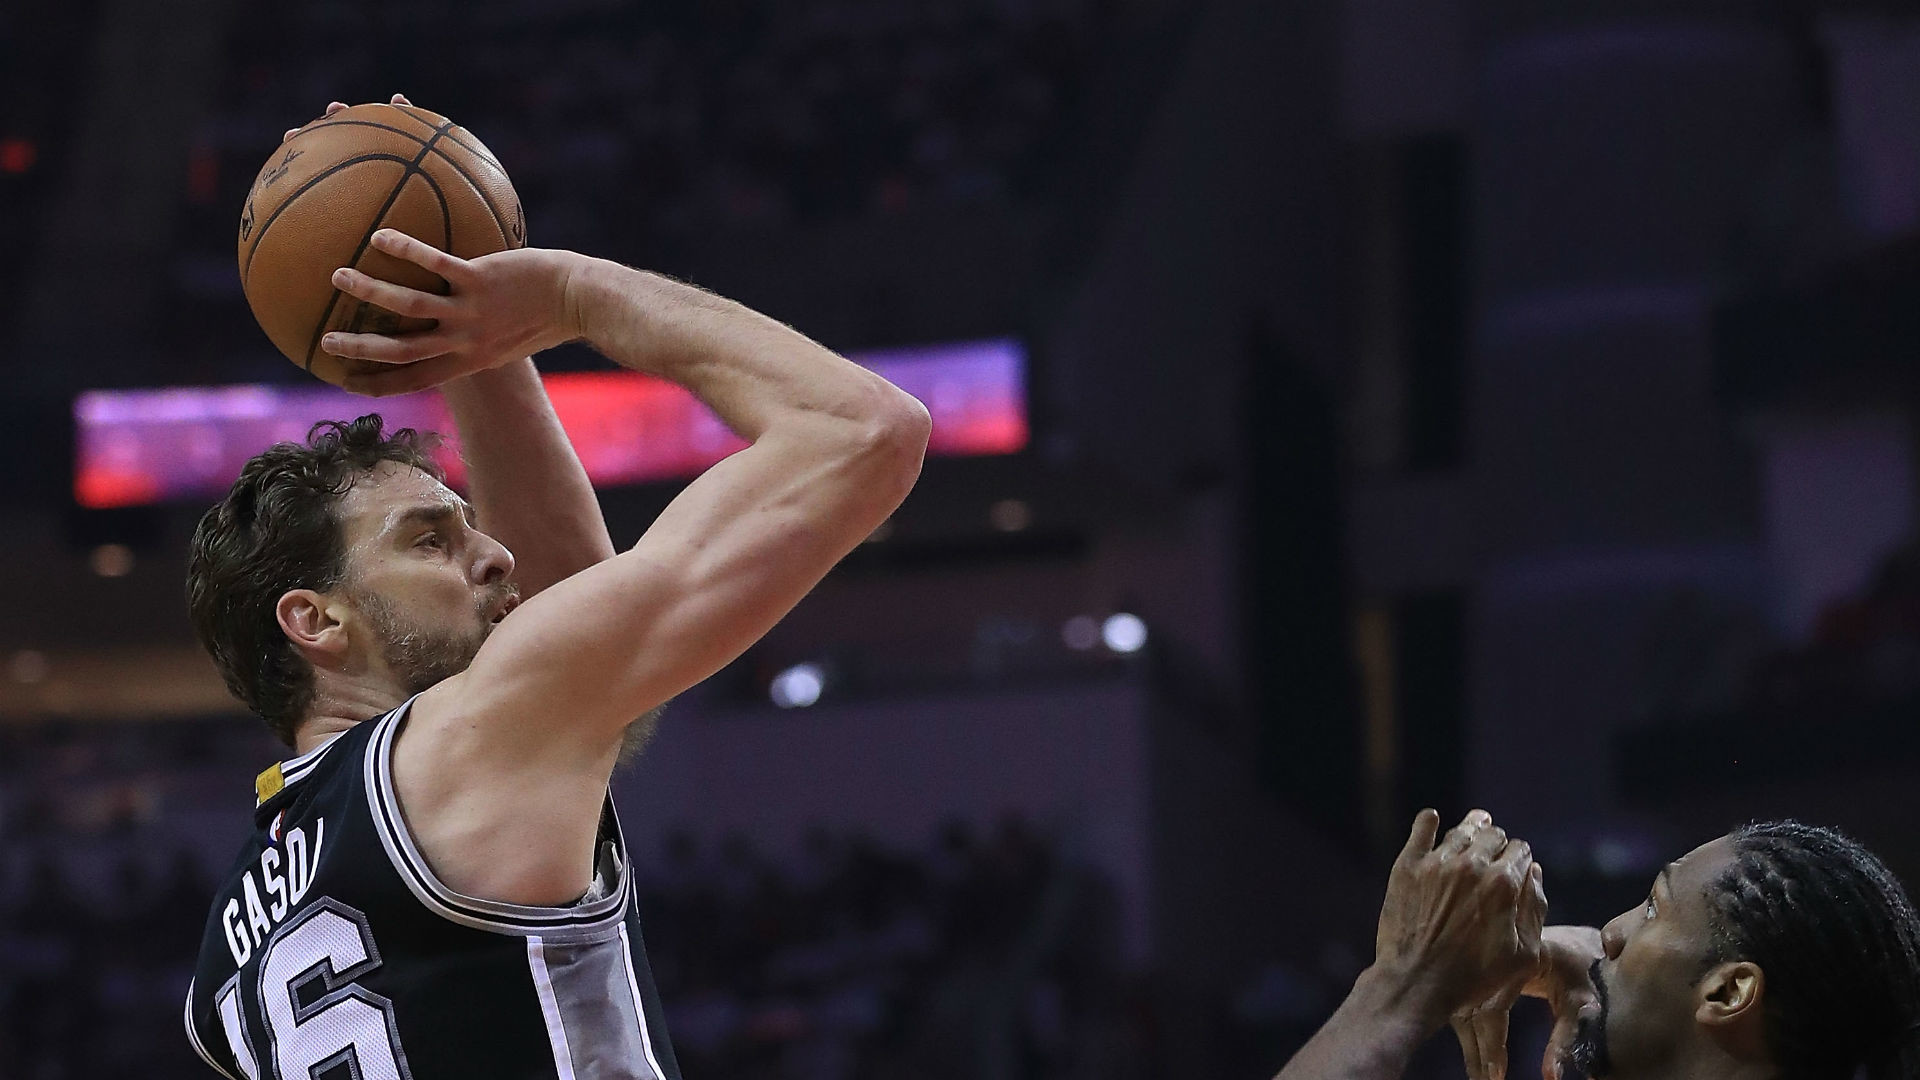 1920x1080 NBA free agency: Pau Gasol will decline $16.2 million option to remain with  Spurs | NBA | Sporting News